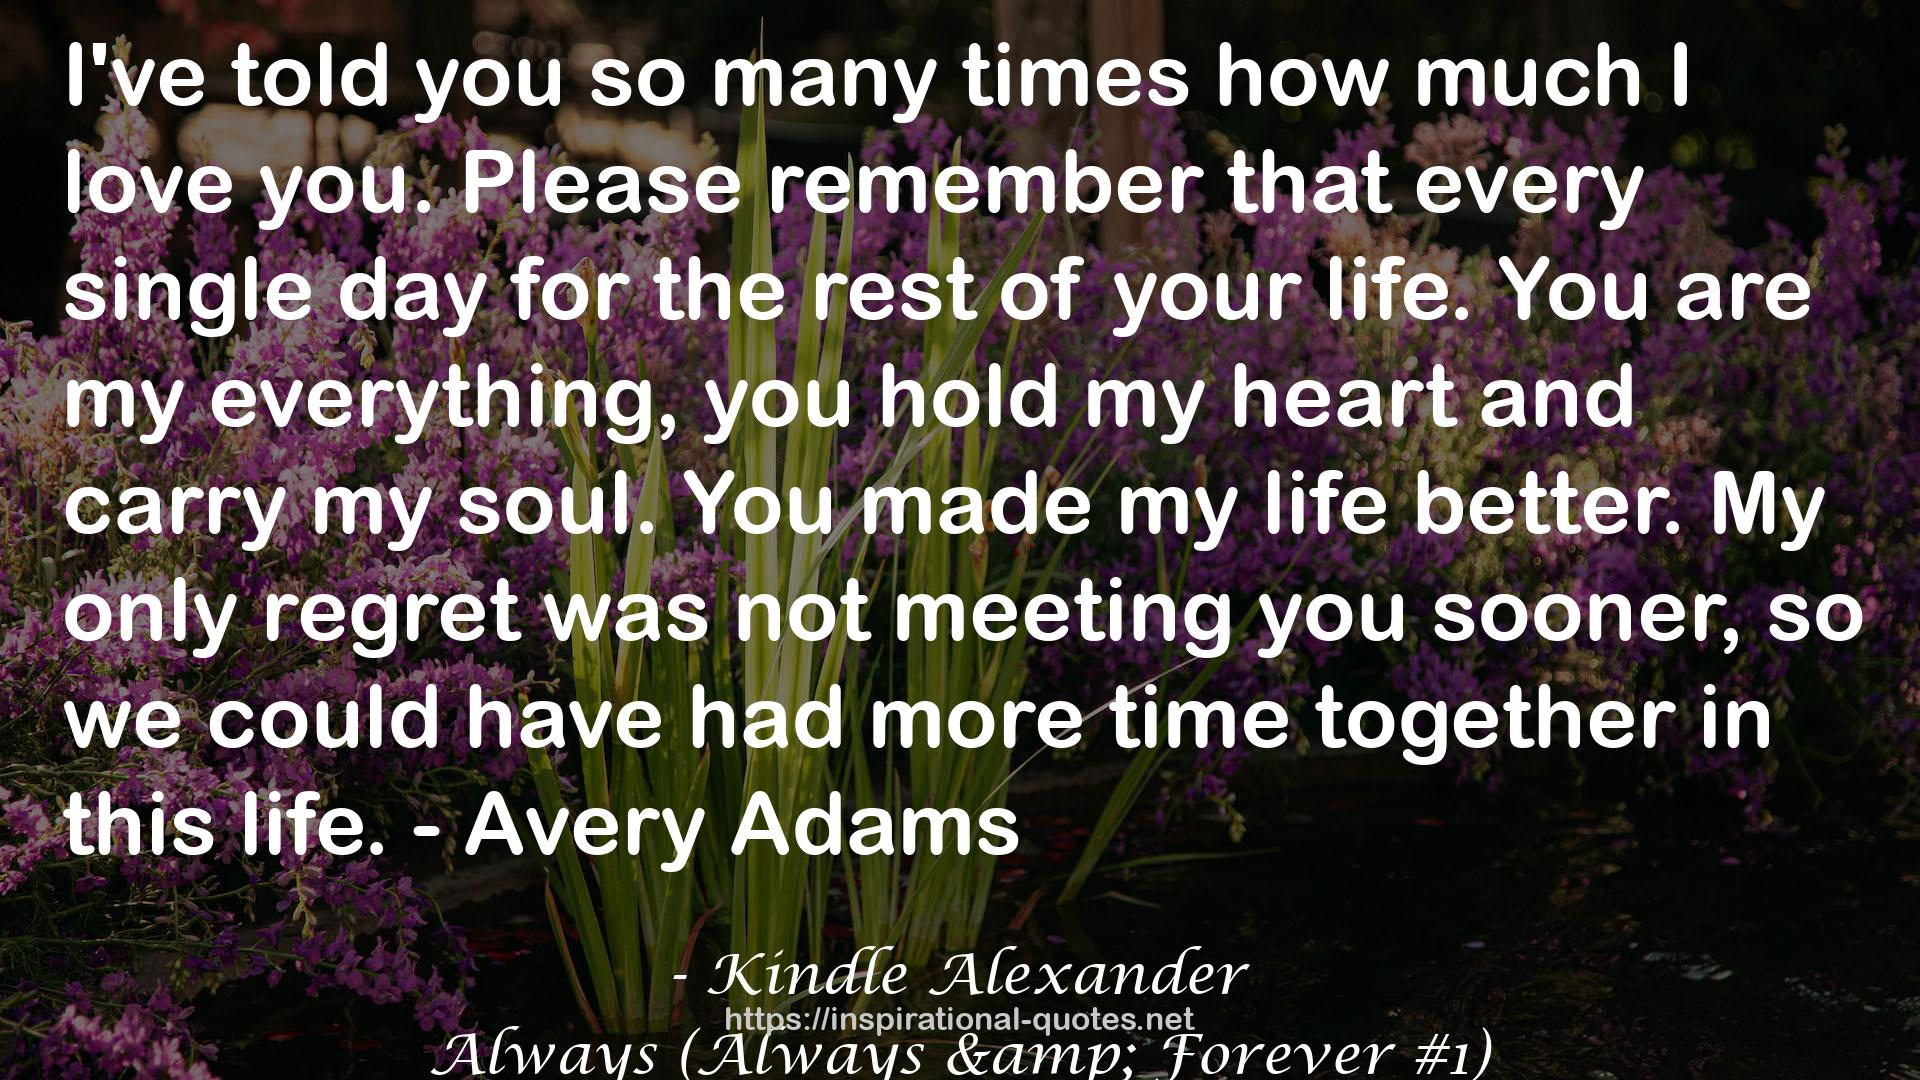 Always (Always & Forever #1) QUOTES